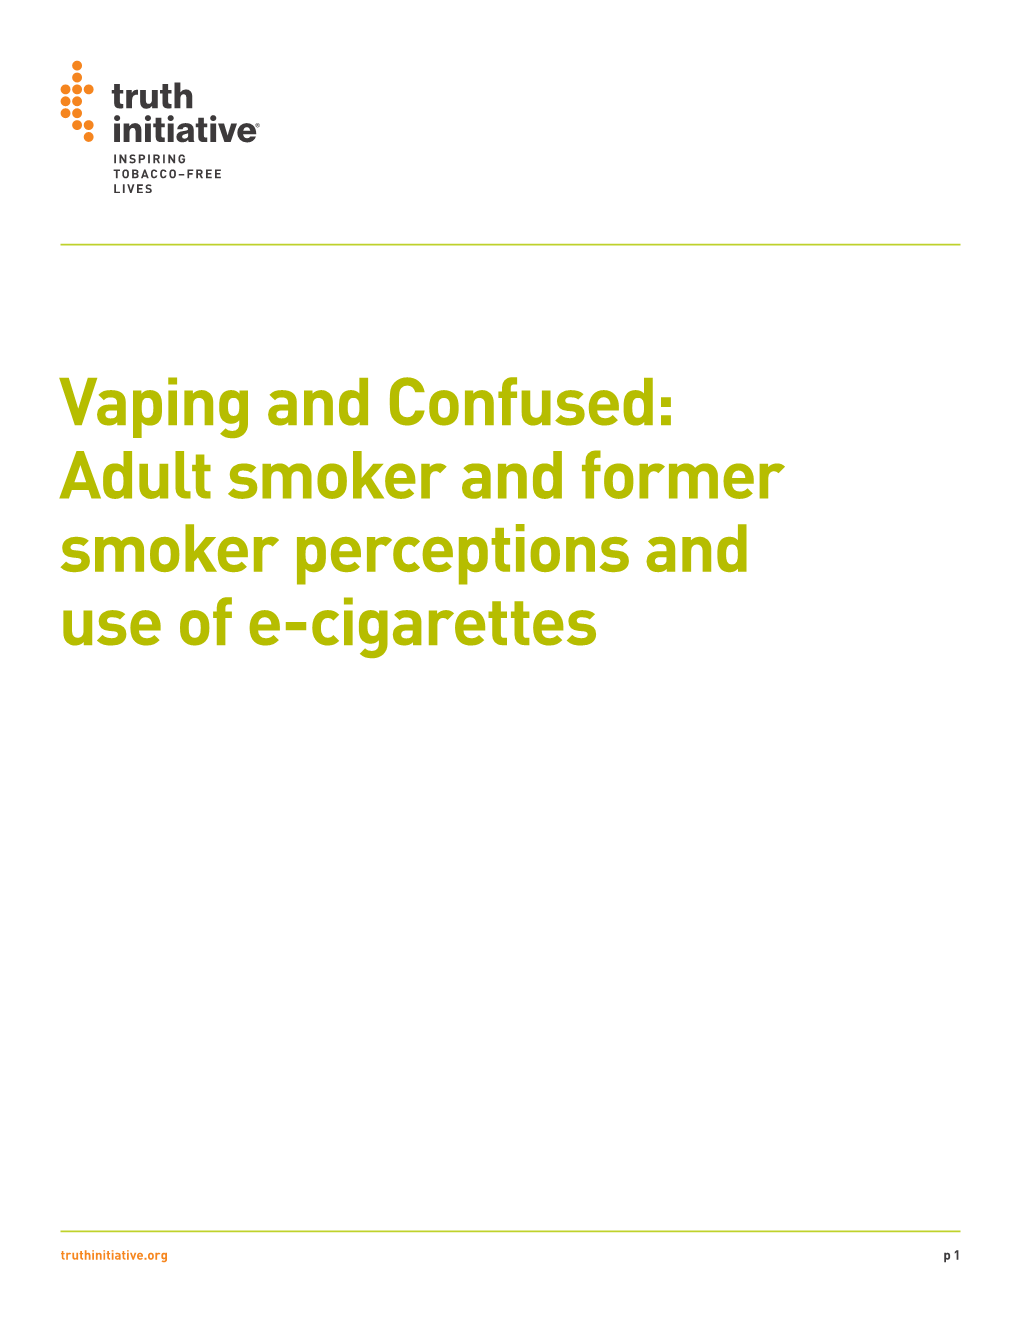 Adult Smoker and Former Smoker Perceptions and Use of E-Cigarettes